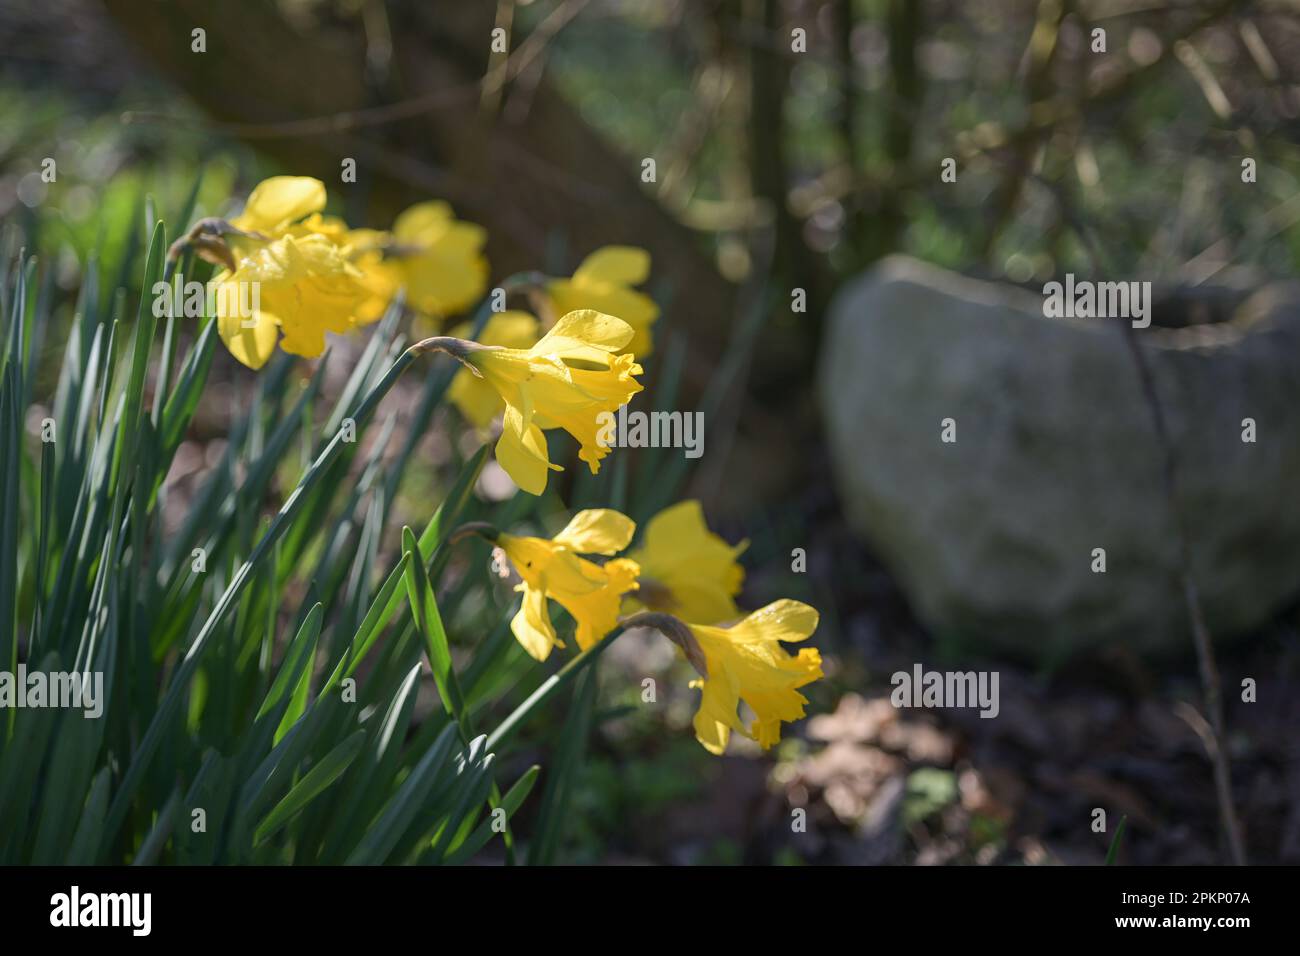 Yellow daffodils (Narcissus) blooming in a garden in the spring, copy space, selected focus, narrow depth of field Stock Photo